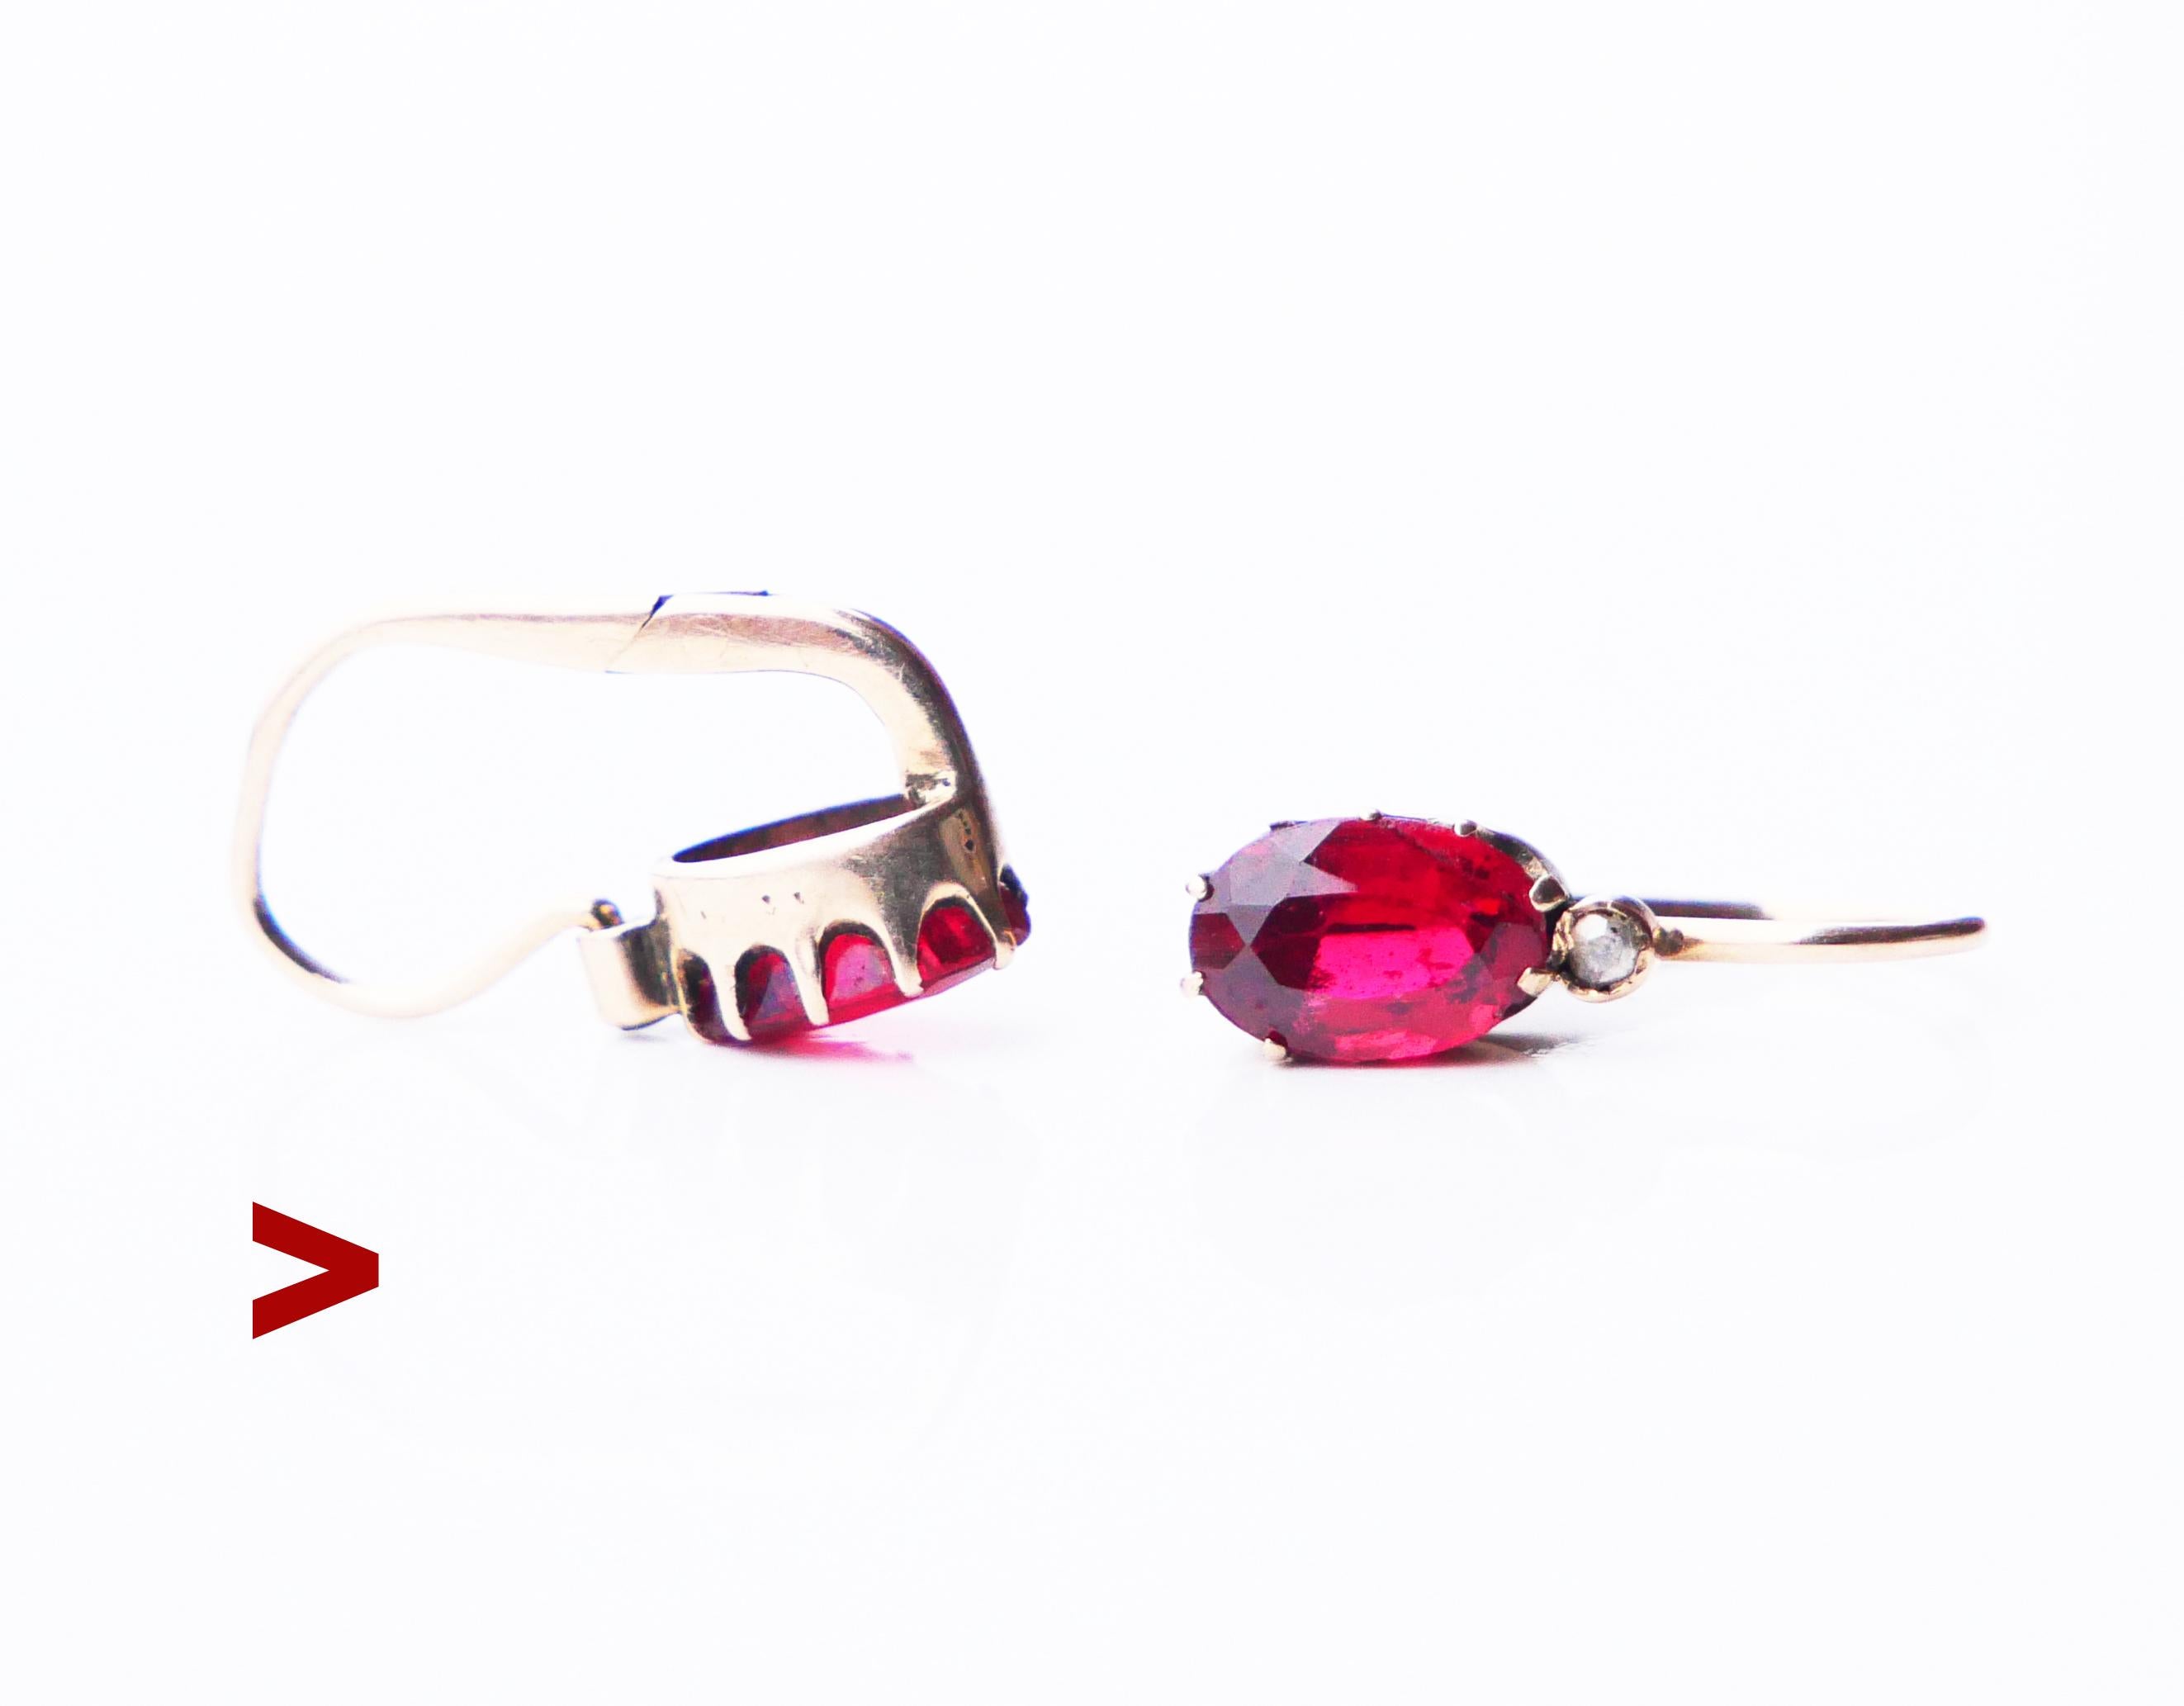 A pair of antique earrings with folding hooks decorated with oval cut Garnets 7 mm x 5 mm / ca. 0.8 ct each and rose cut Diamonds.

No hallmarks on both, metal tested solid 14K Gold. For several generations this pair was in possession of some